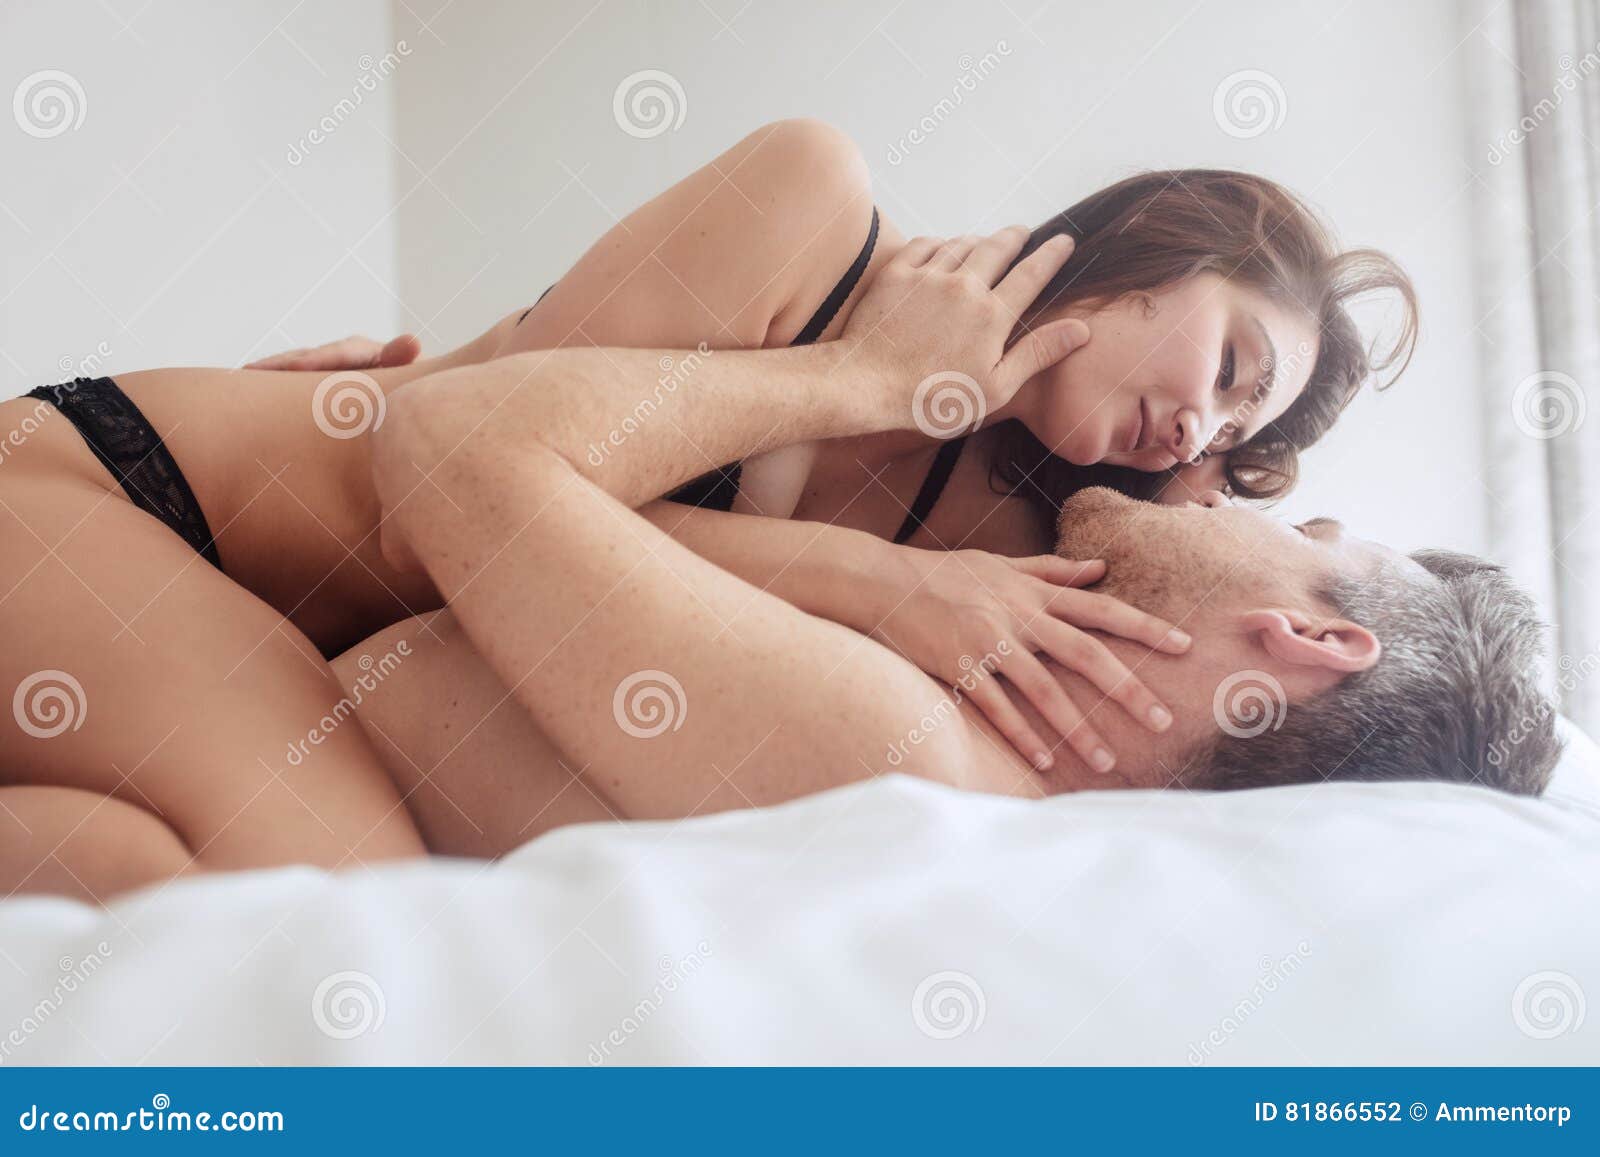 Beautiful Passionate Couple Having Sex on Bed Stock Photo photo